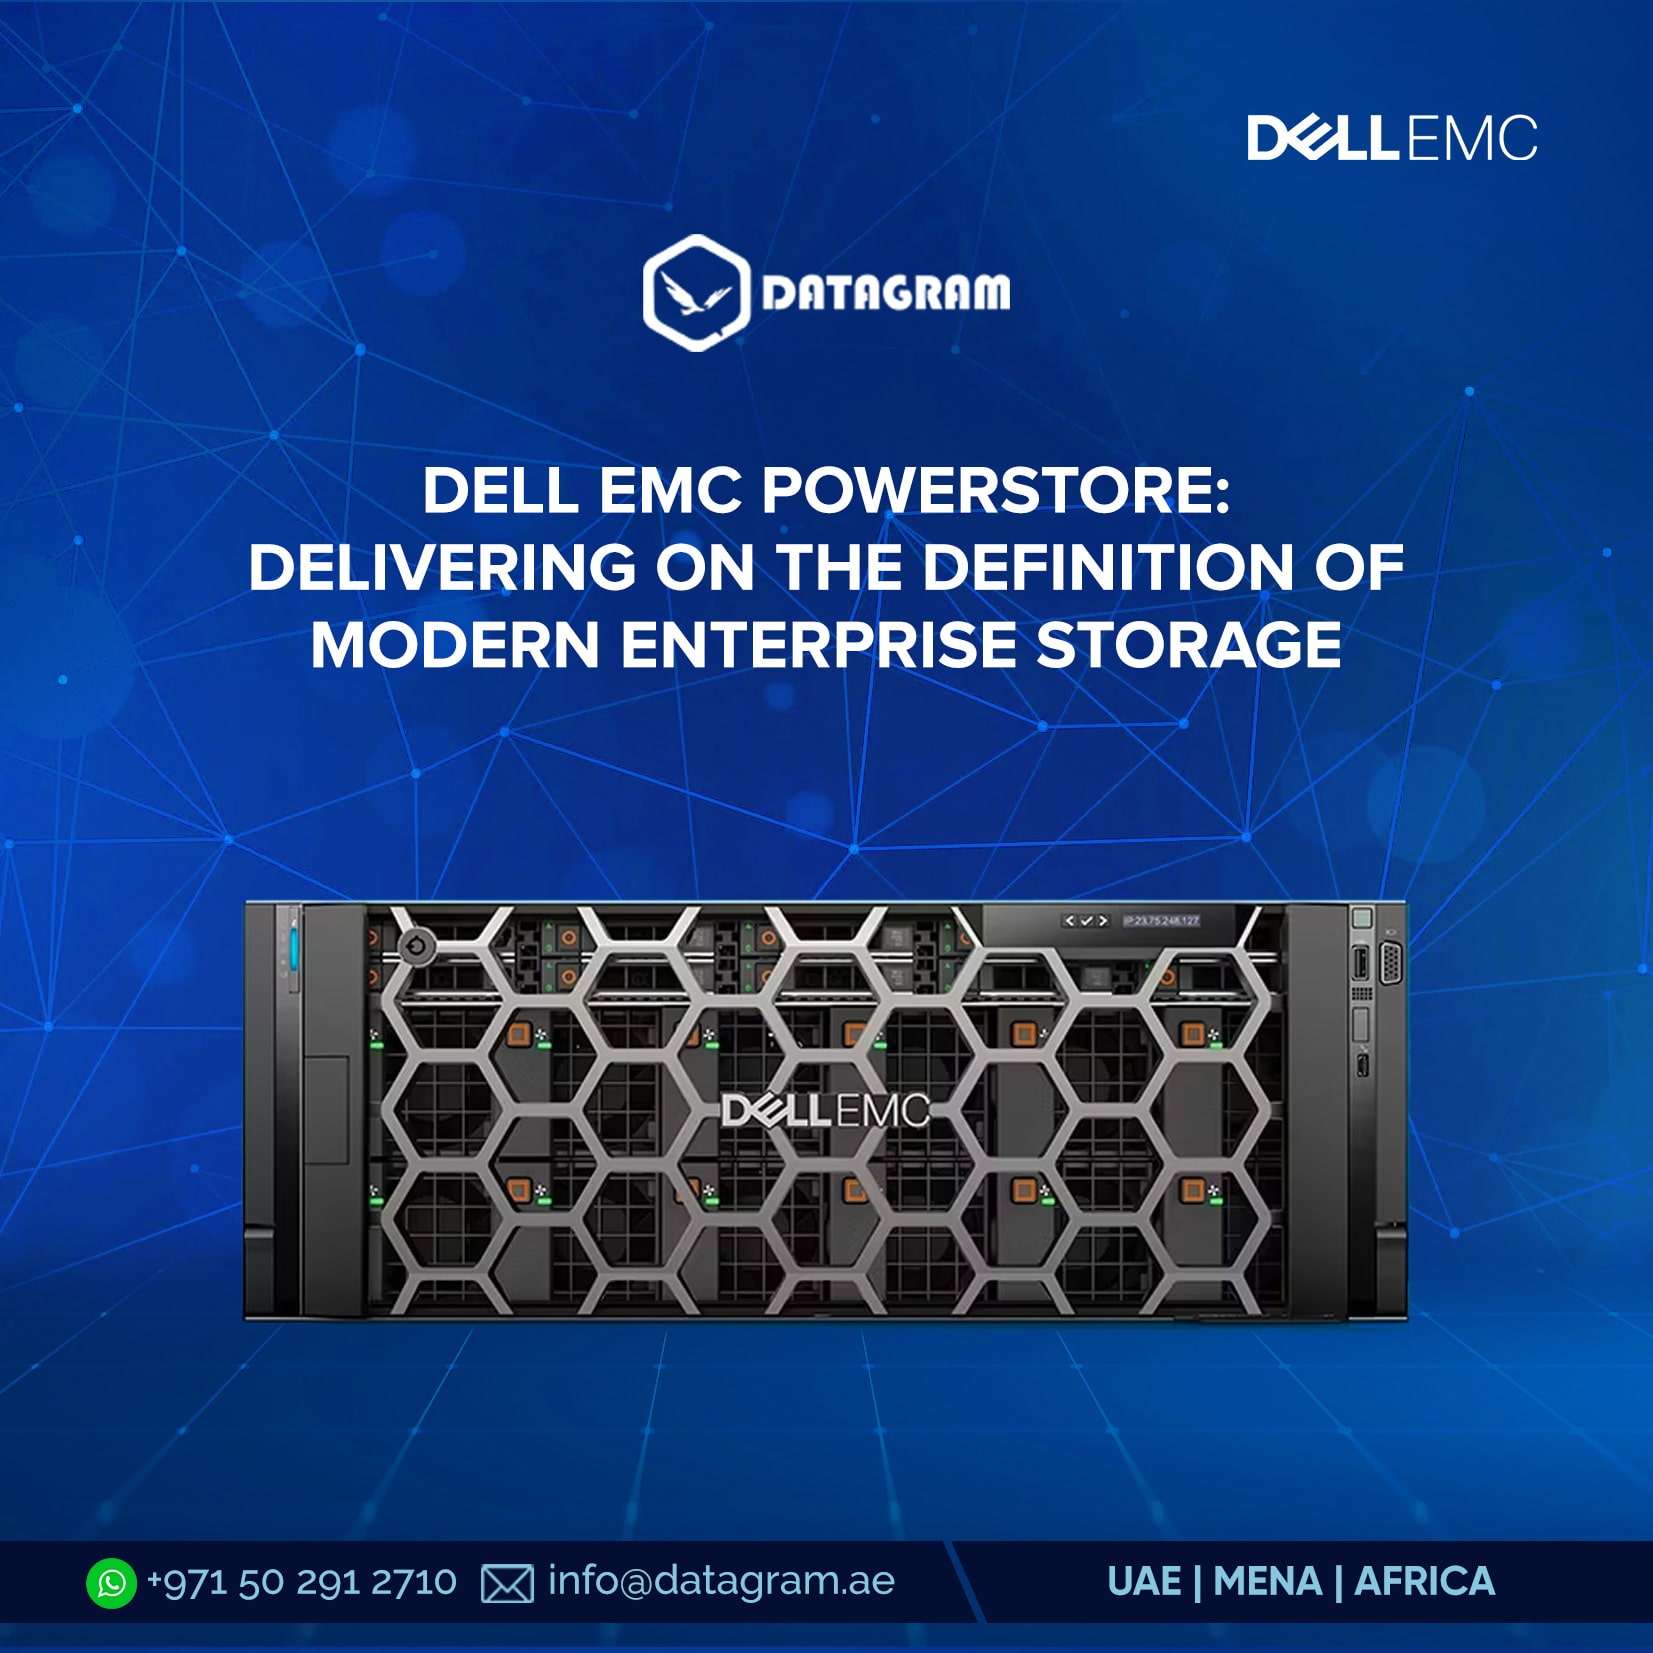 Dell EMC PowerStore: Delivering on the Definition of Modern Enterprise Storage